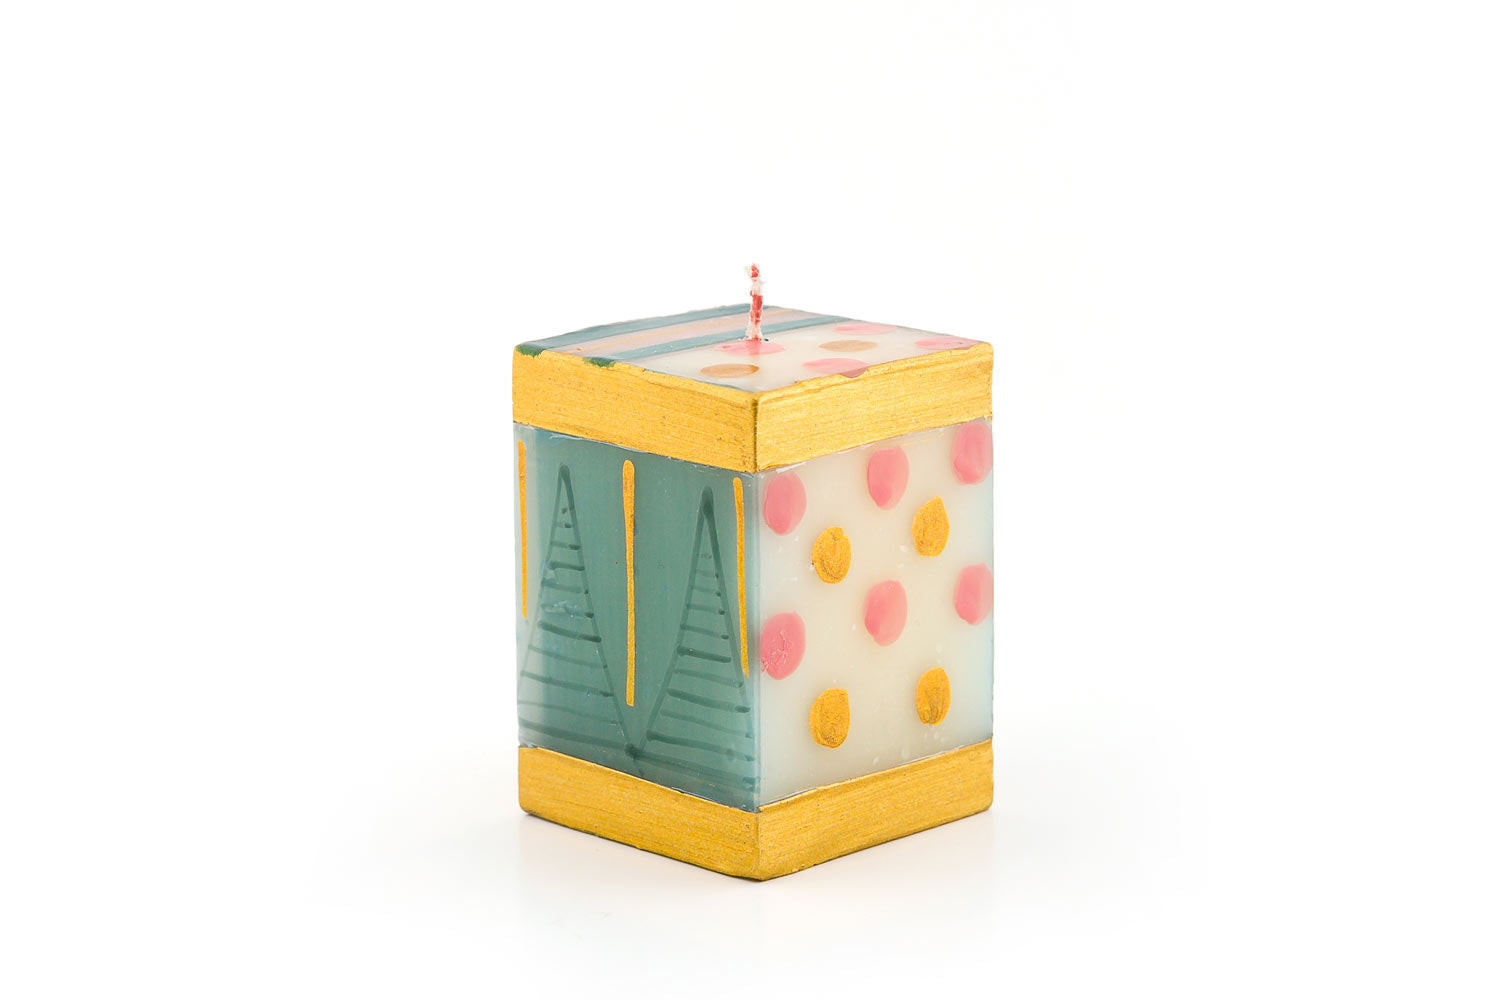 Delight 2x2x3inch cube. Hand painted in turquoise, with pink & gold dots on a white background. Fair Trade candles.